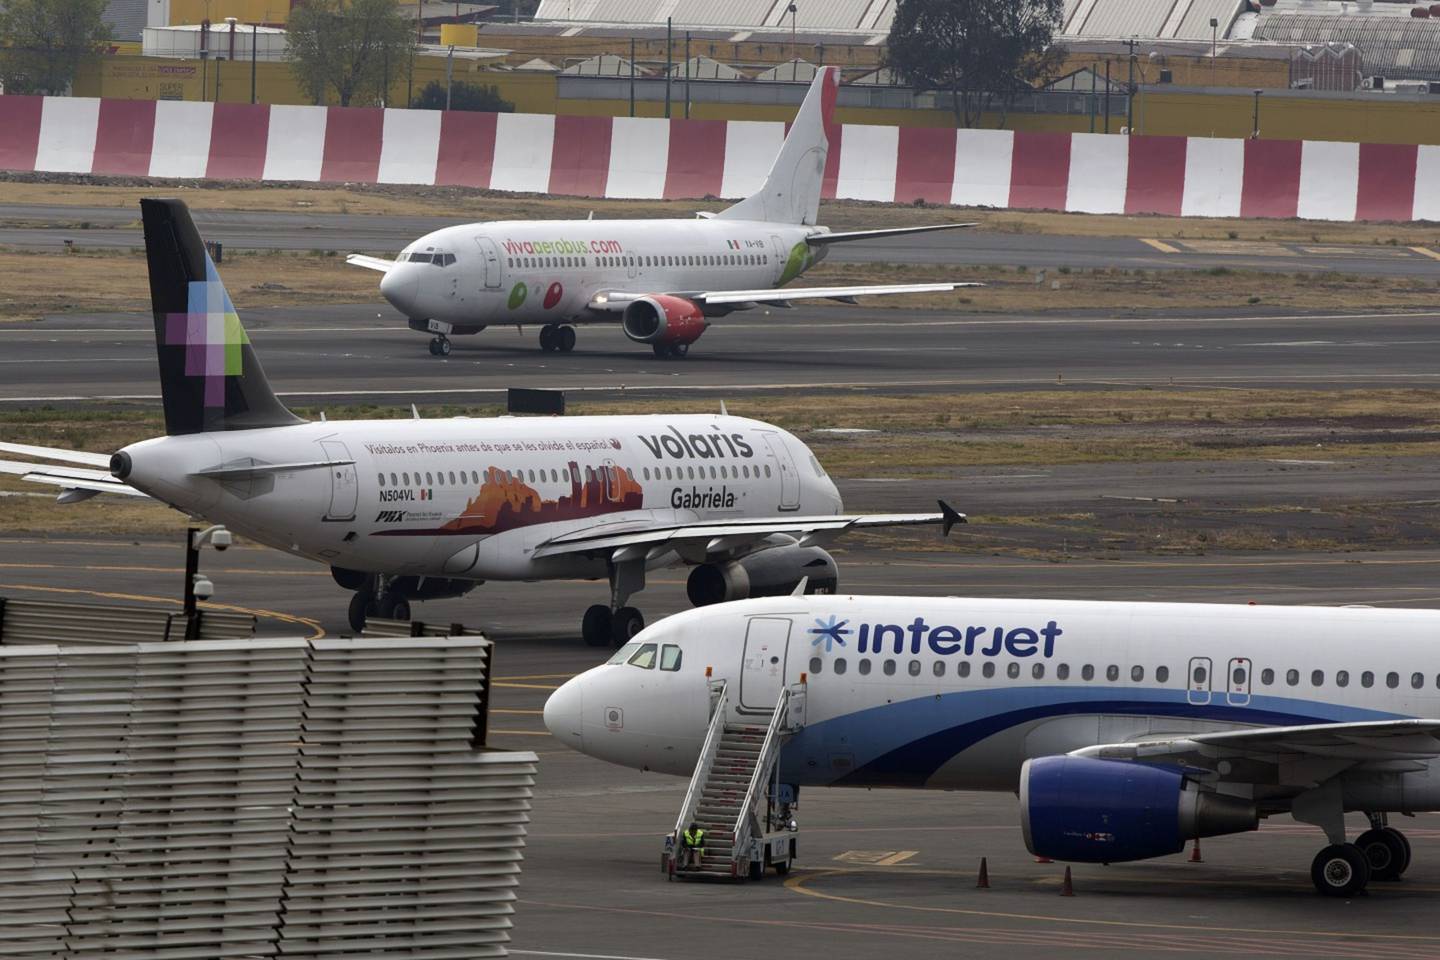 Interjet and Volaris airplanes sit parked on the tarmac while a Grupo Viva Aerobus SAB airplane prepares to take off at Benito Juarez International Airport (AICM) in Mexico City, Mexico, on Thursday, Jan. 16, 2014. Grupo Viva Aerobus SAB filed for what would be Mexico's second initial public offering of shares by an airline since September as passenger traffic sets annual records. Interjet, Mexico's second-biggest carrier in 2012, may sell shares this year, Executive President Miguel Aleman Magnani said in November. Photographer: Susana Gonzalez/Bloombergdfd